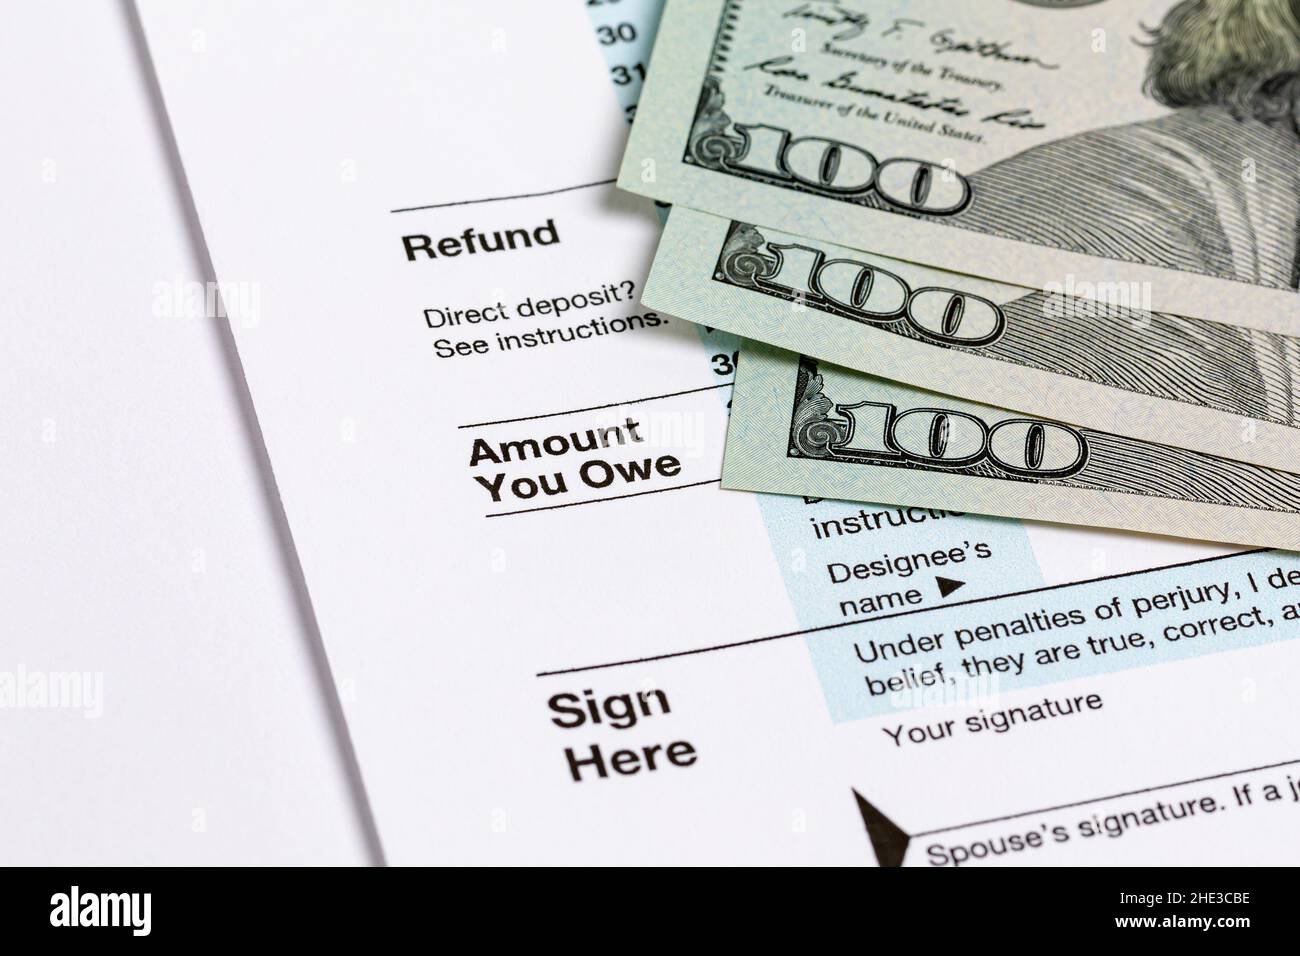 1040 individual income tax return form and money. Tax payment, filing taxes and financial planning concept. Stock Photo